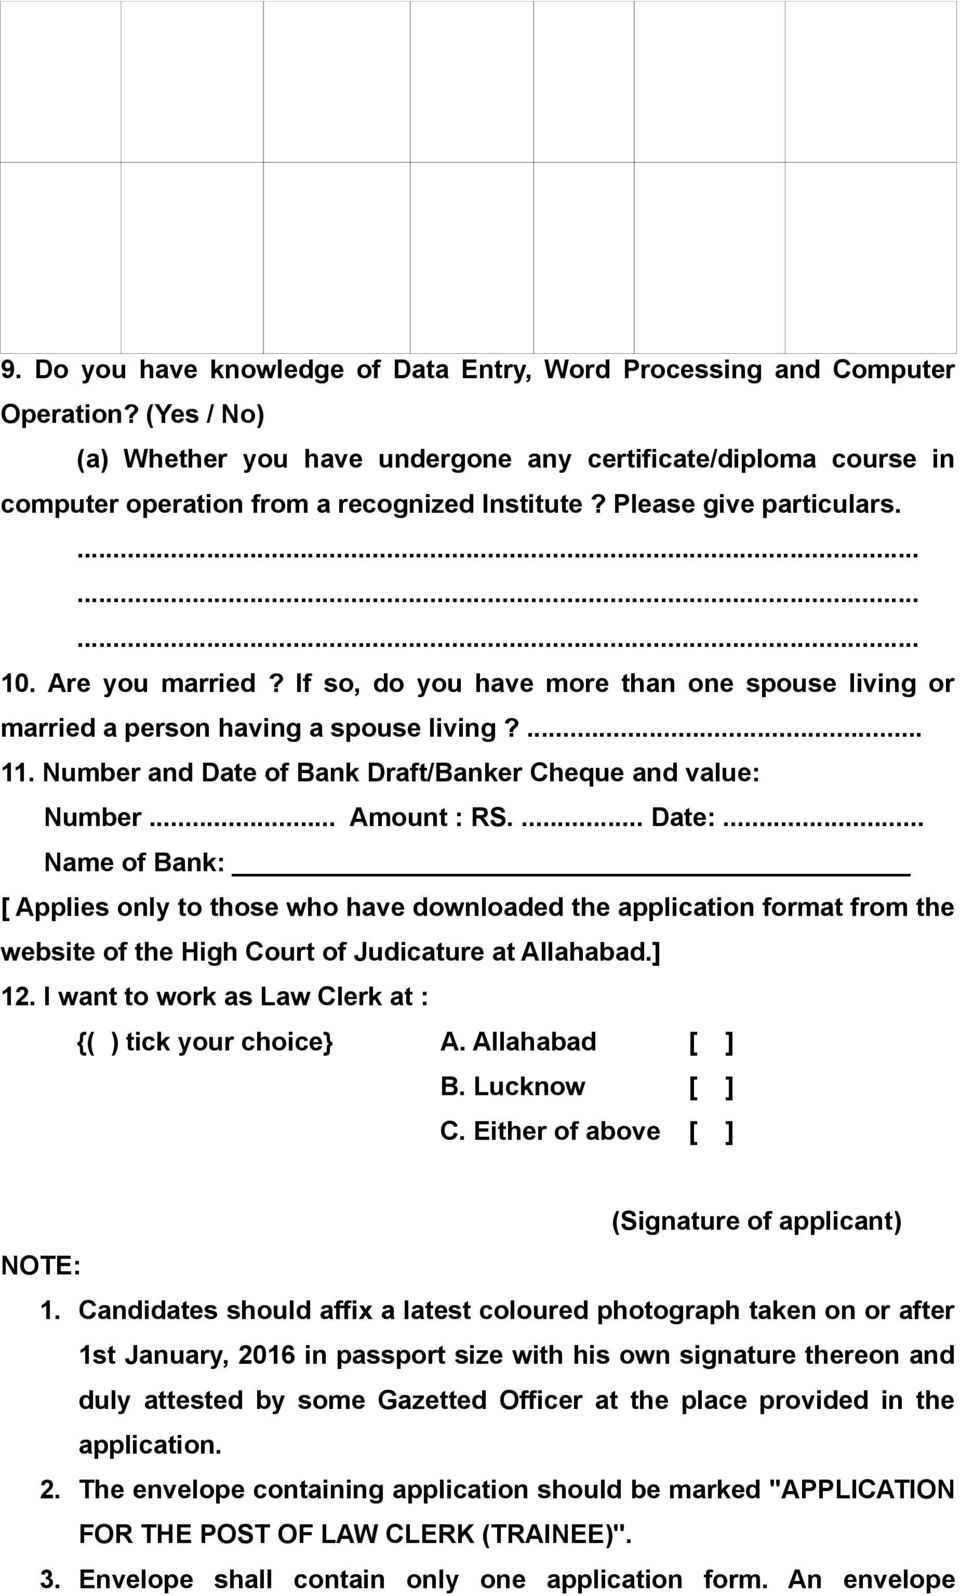 If so, do you have more than one spouse living or married a person having a spouse living?... 11. Number and Date of Bank Draft/Banker Cheque and value: Number... Amount : RS.... Date:.